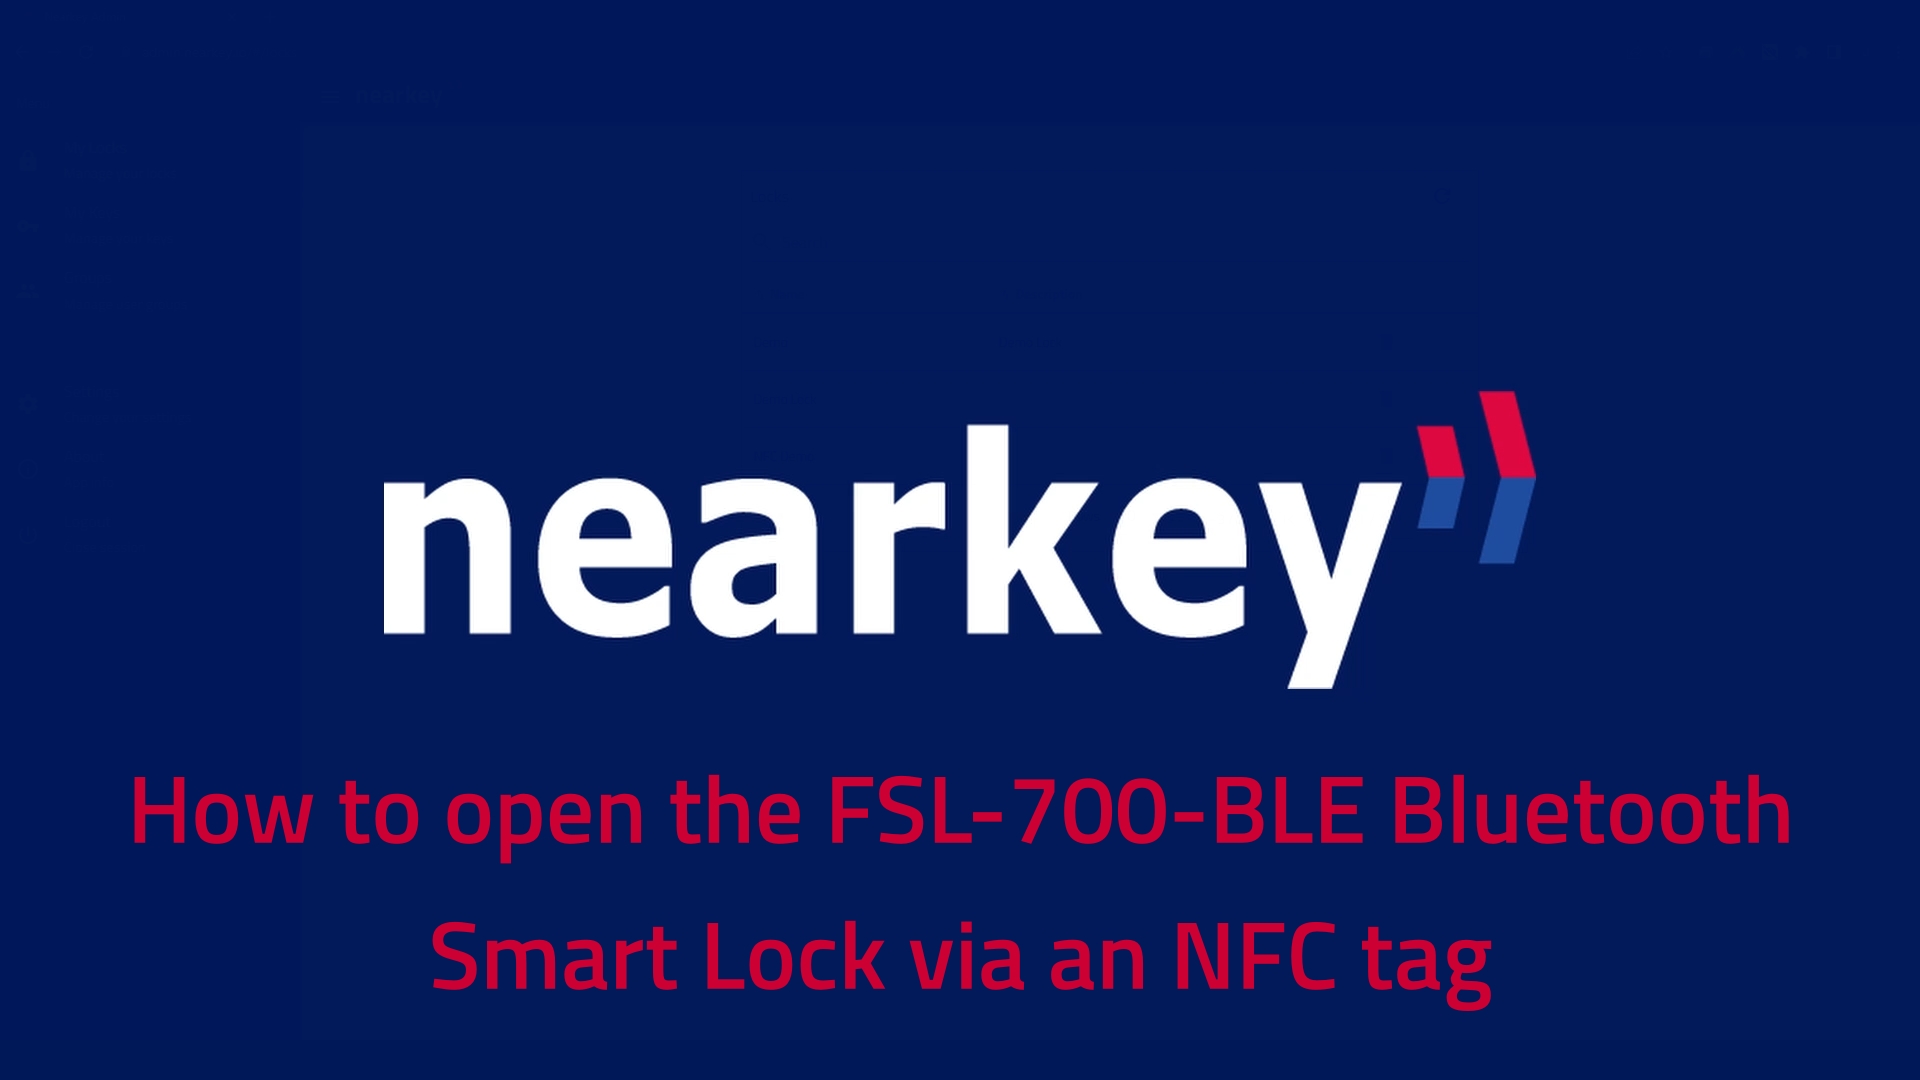 nearkey - How to open the FSL 700 BLE Bluetooth Smart Lock via an NFC tag